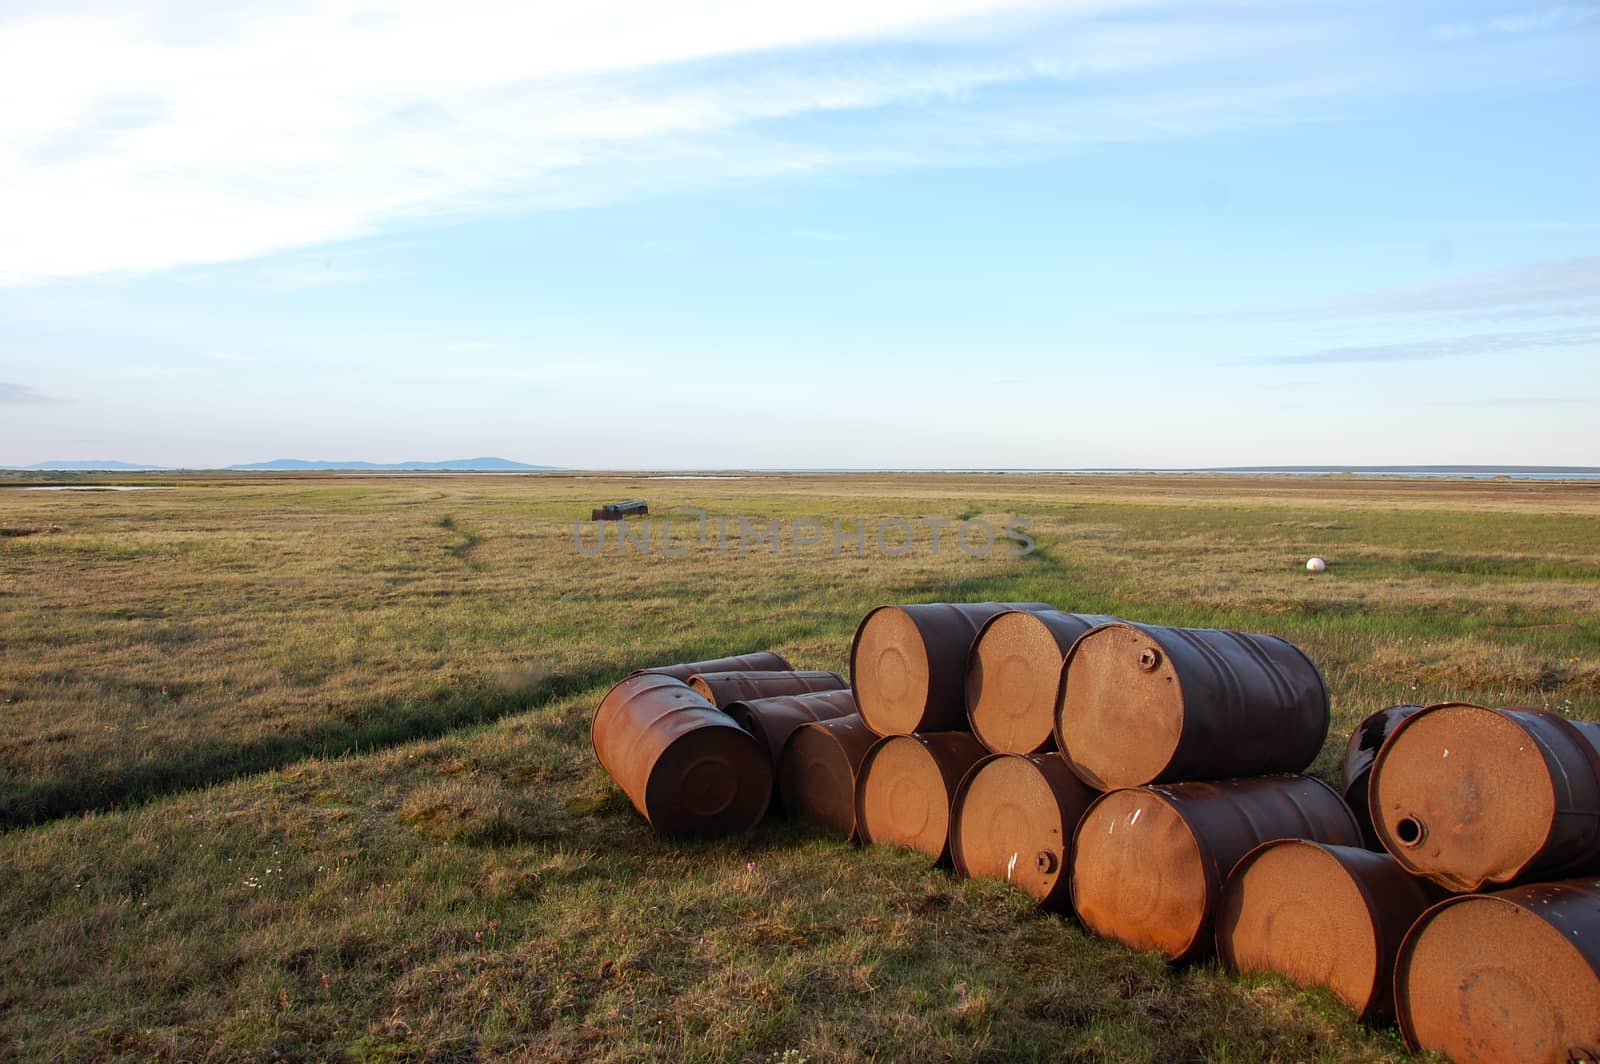 Abandoned oil drums at tundra, Chenkul Island, Chukotka, Russia